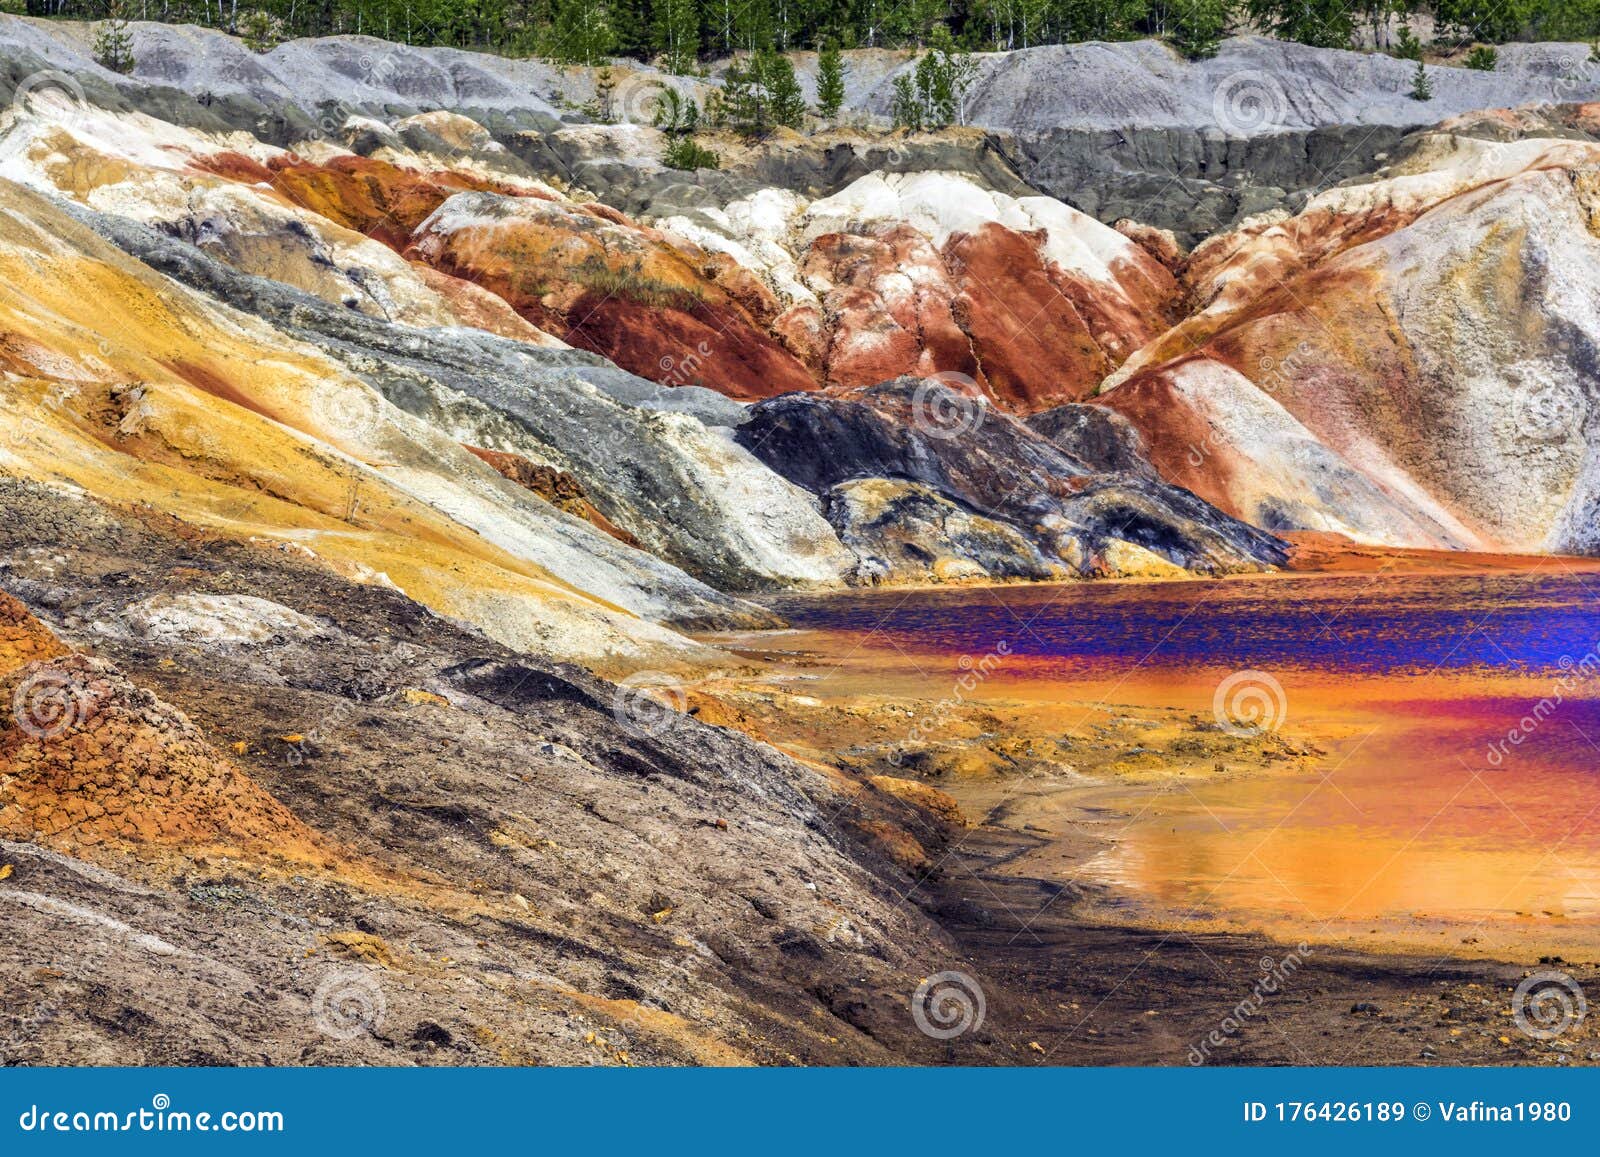 Landscape Like a Planet Mars Surface. Ural Refractory Clay Quarries. Nature of Ural Mountains, Russia. Solidified Red-brown Stock Image - Image of mineral, deposit: 176426189